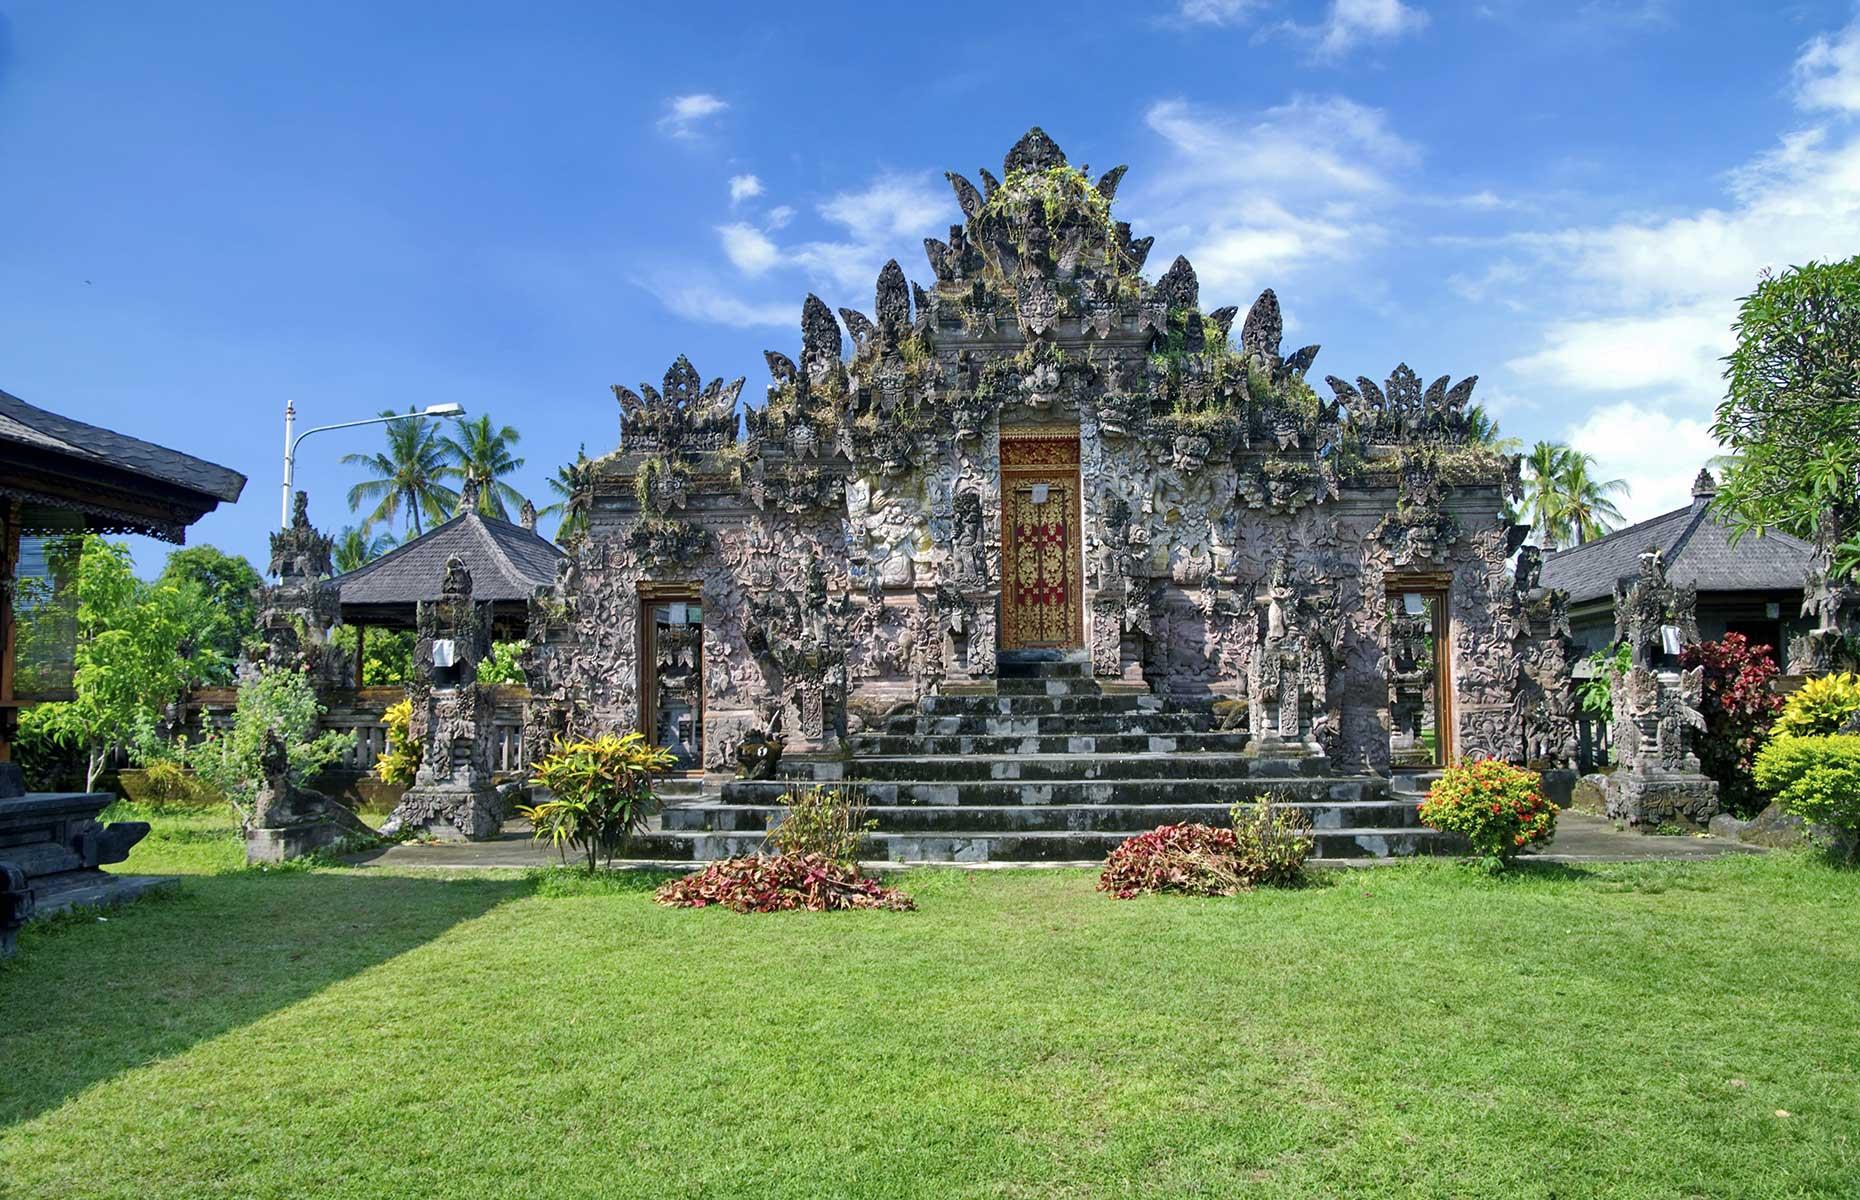 <p>An Insta-famous couple were criticized for <a href="https://www.insider.com/instagram-couple-under-fire-splashing-holy-water-bali-indonesia-2019-8">inappropriately playing with holy water</a> at a 15th-century Balinese temple, and were dubbed "disgusting" and "insulting to Indonesia". The Czech couple, who have 80,000 Instagram followers, posted videos of themselves laughing as Zdenek Slouka splashed water onto Sabina Dolezalova's bare backside at the Beji temple. Following a public backlash they released an apology video claiming they didn't know they were at a holy site or using holy water.</p>  <p><a href="https://www.loveexploring.com/galleries/118797/ancient-discoveries-found-recently?page=1"><strong>These incredible ancient discoveries were only found recently</strong></a></p>